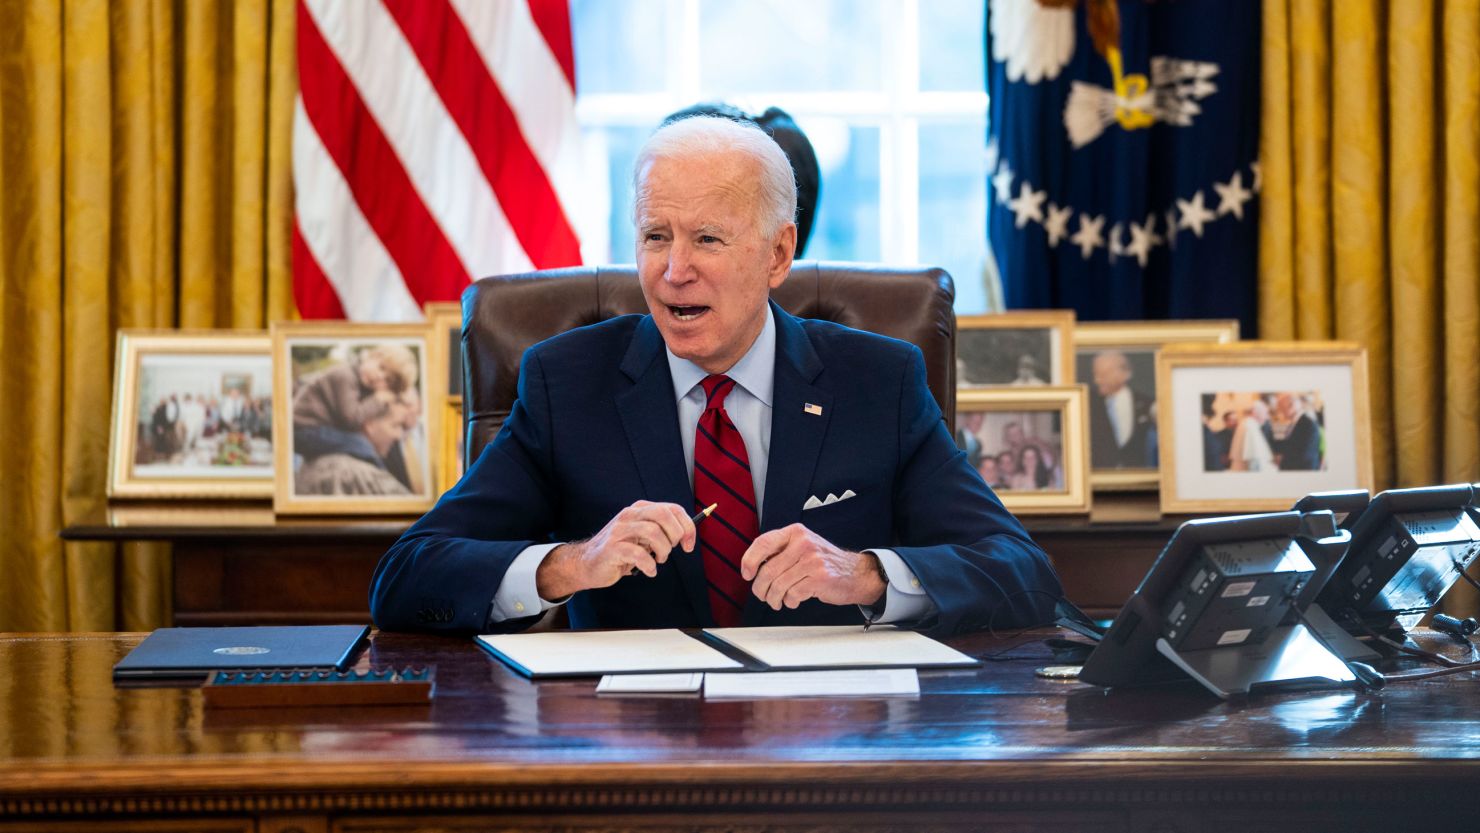 U.S. President Joe Biden signs executive actions in the Oval Office of the White House on January 28, 2021 in Washington, DC. Photo by Doug Mills-Pool/Getty Images